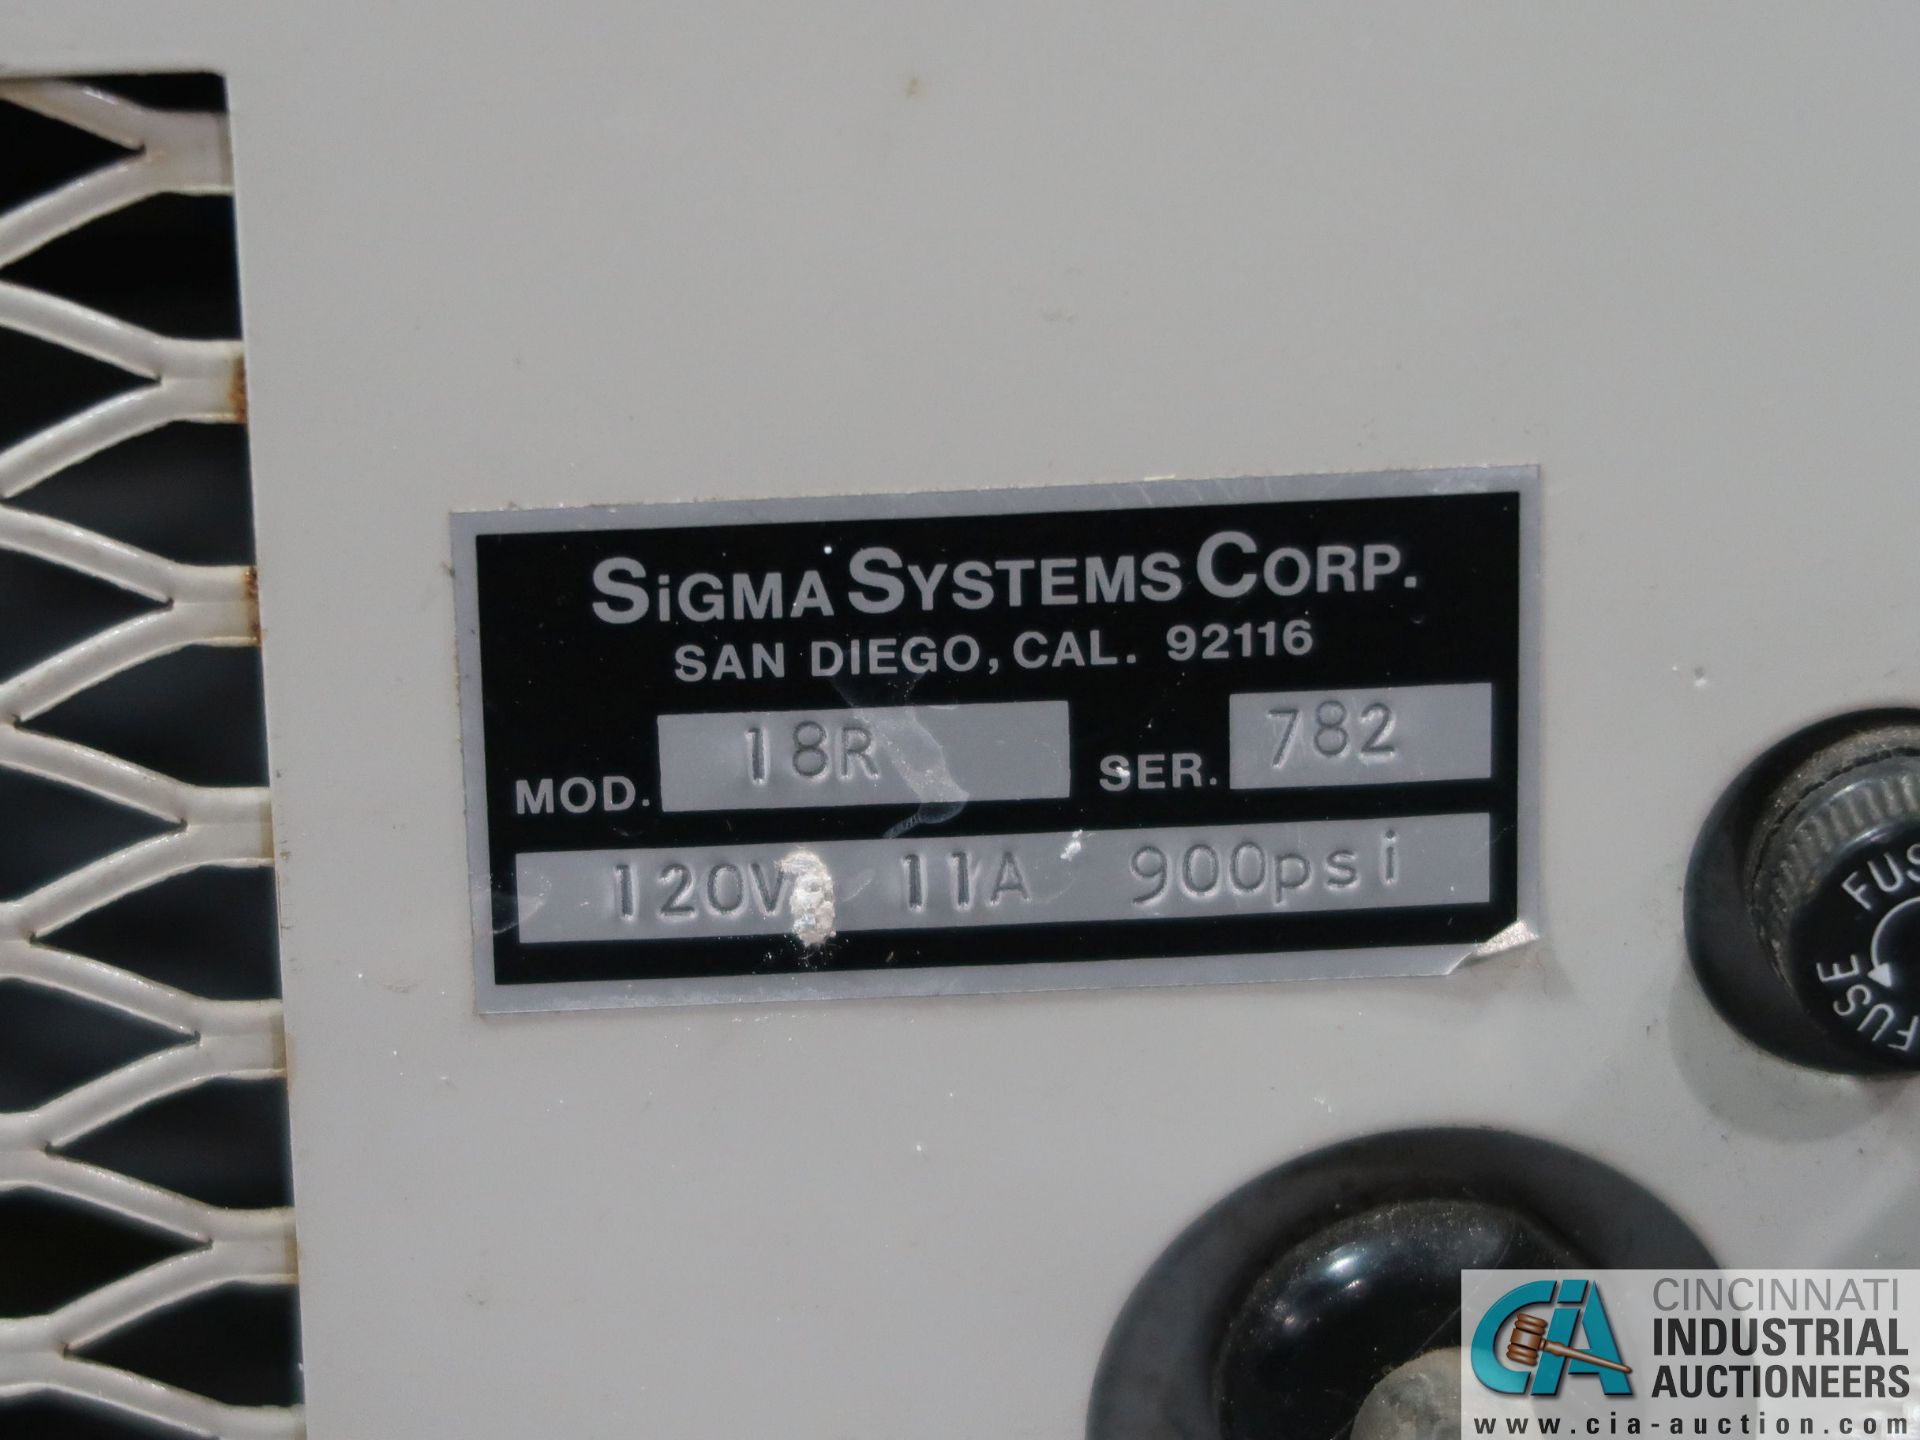 SIGMA SYSTEMS MODEL 18R TEST CHAMBER; S/N 782, 120 VOLT, CHAMEBR DIMENSIONS: 10" X 10" X 10" WITH ( - Image 6 of 7